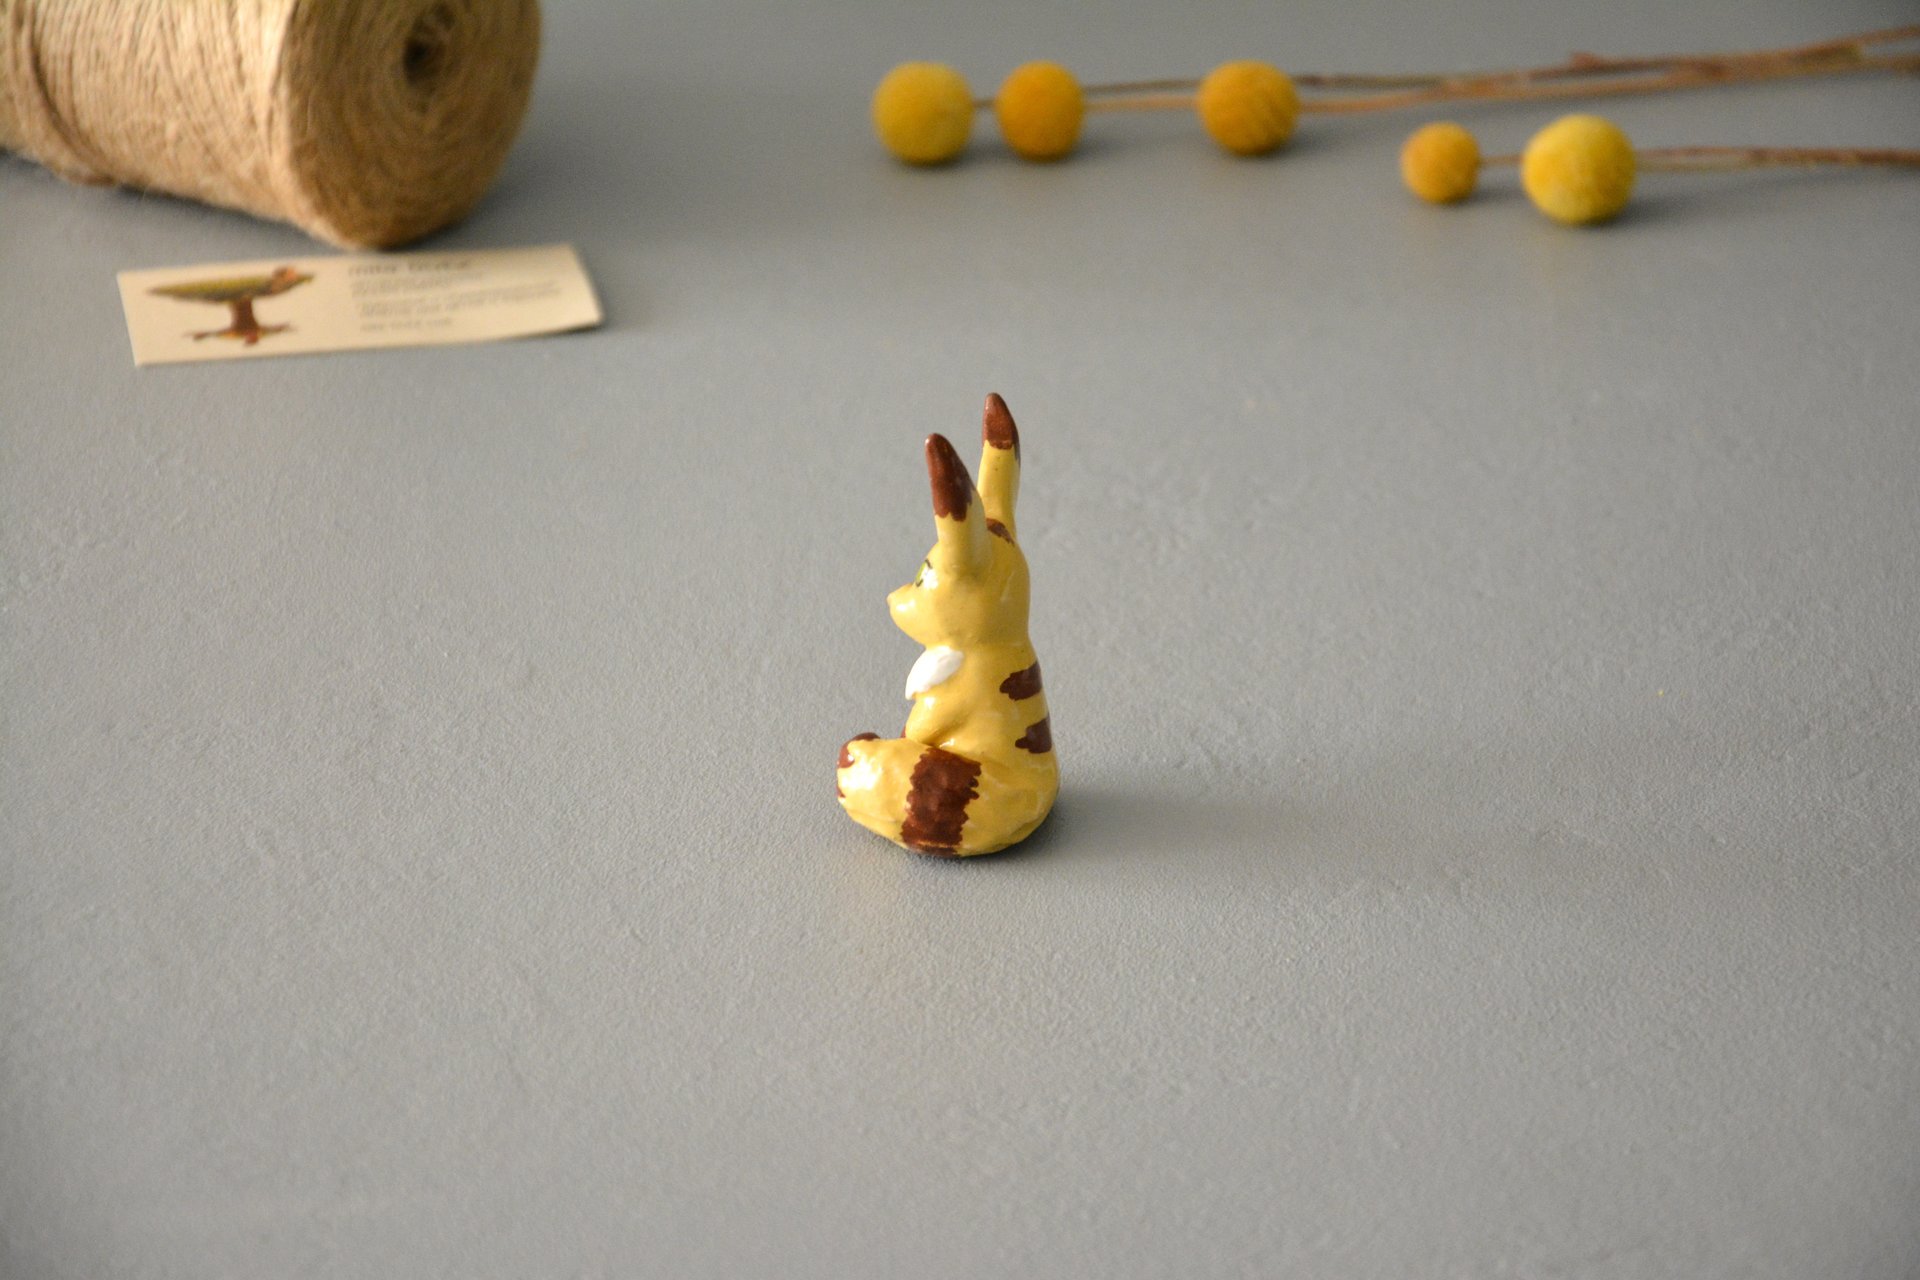 Squirrel-fox figurine, a character from the anime "Navsikai from the valley of the winds, height 7cm, photo 4 of 6.